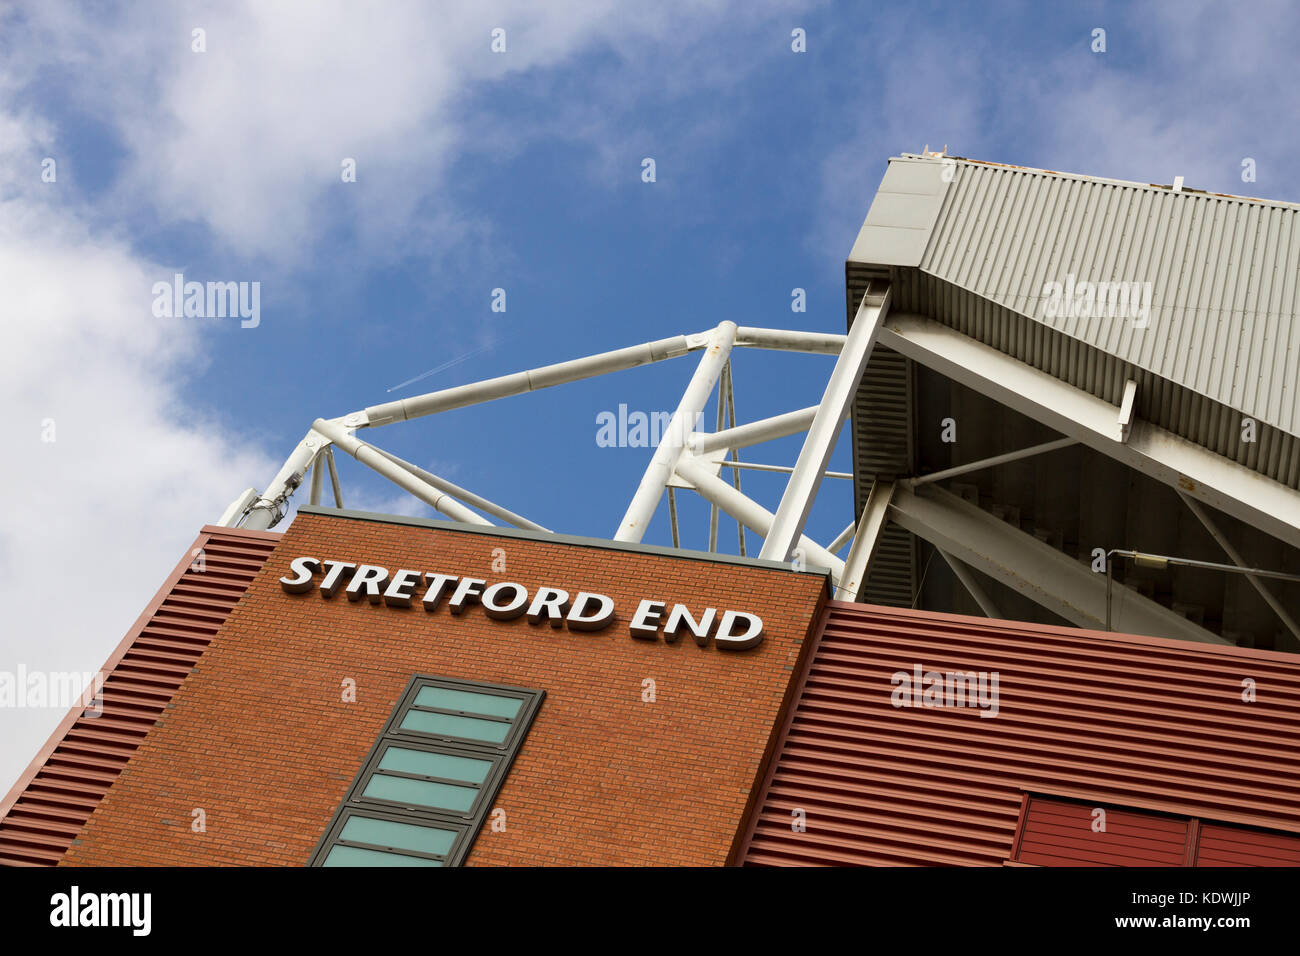 The Stretford End or West Stand at Old Trafford Footall Stadium. Home of Manchester United Football Club. Stock Photo